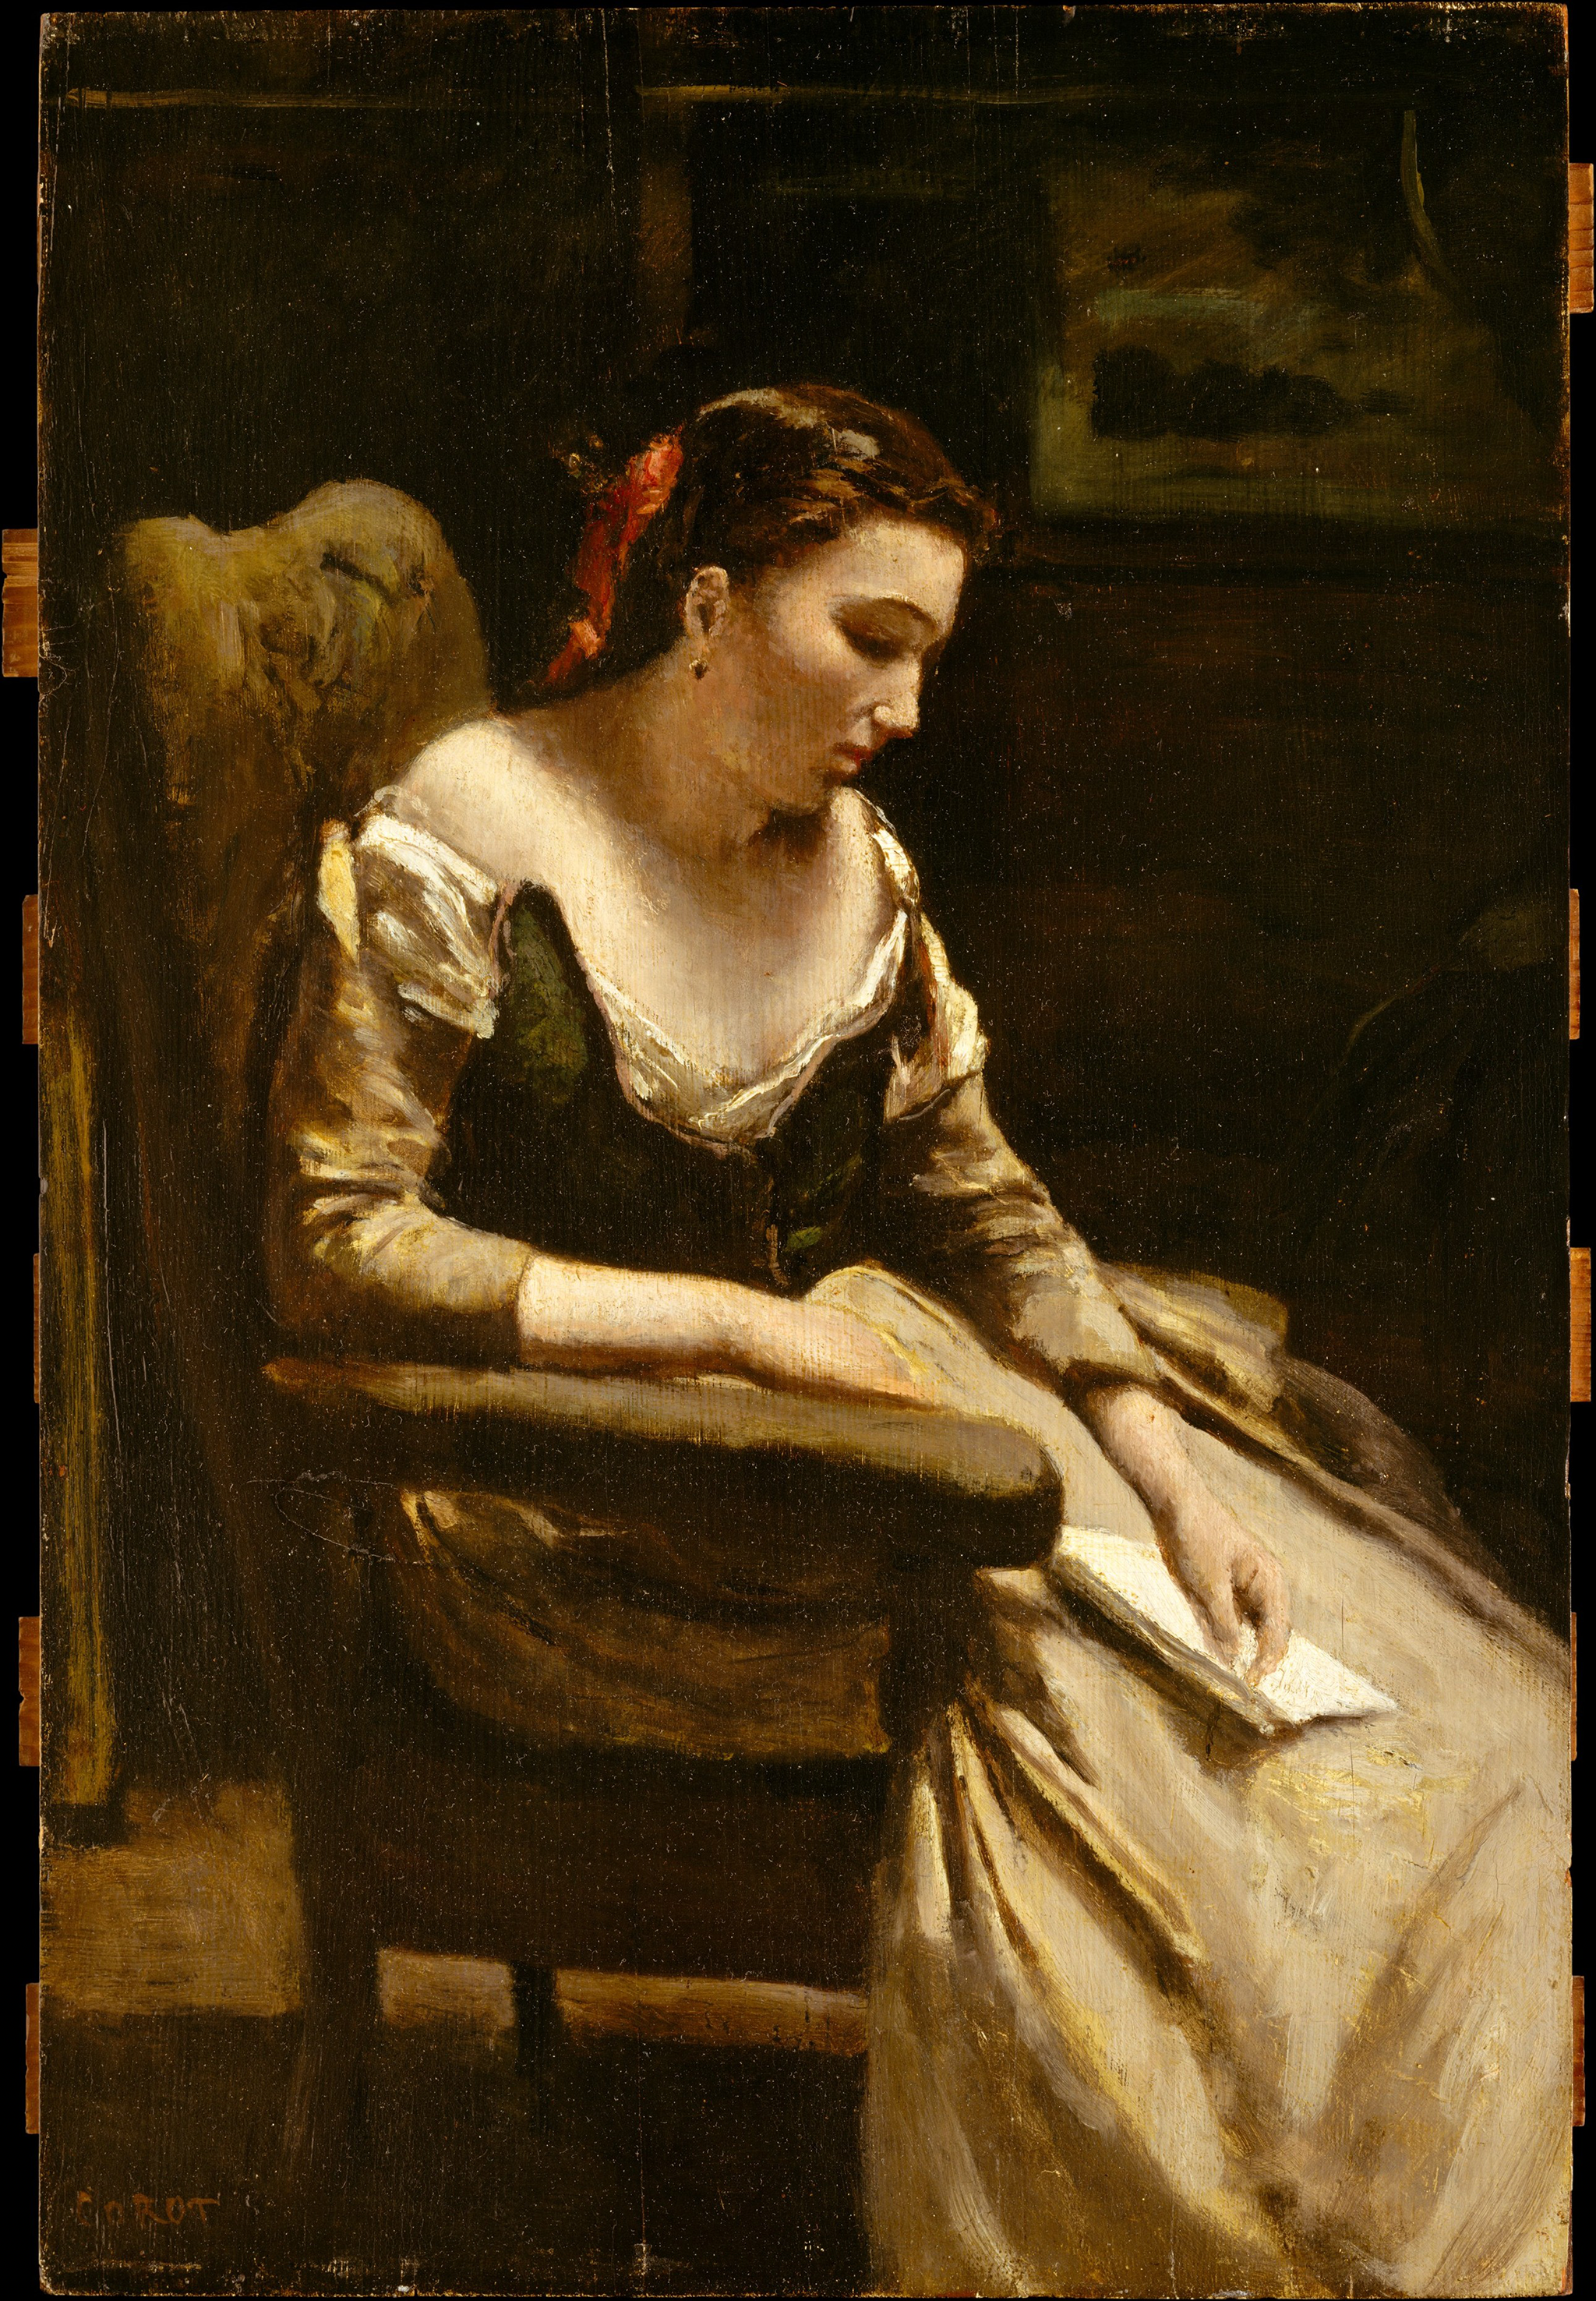 A painting depicting a woman with a long dress siting on a chair with an envelope in her hand. She has a red tie in her brown hair, and her head faces down toward the ground.